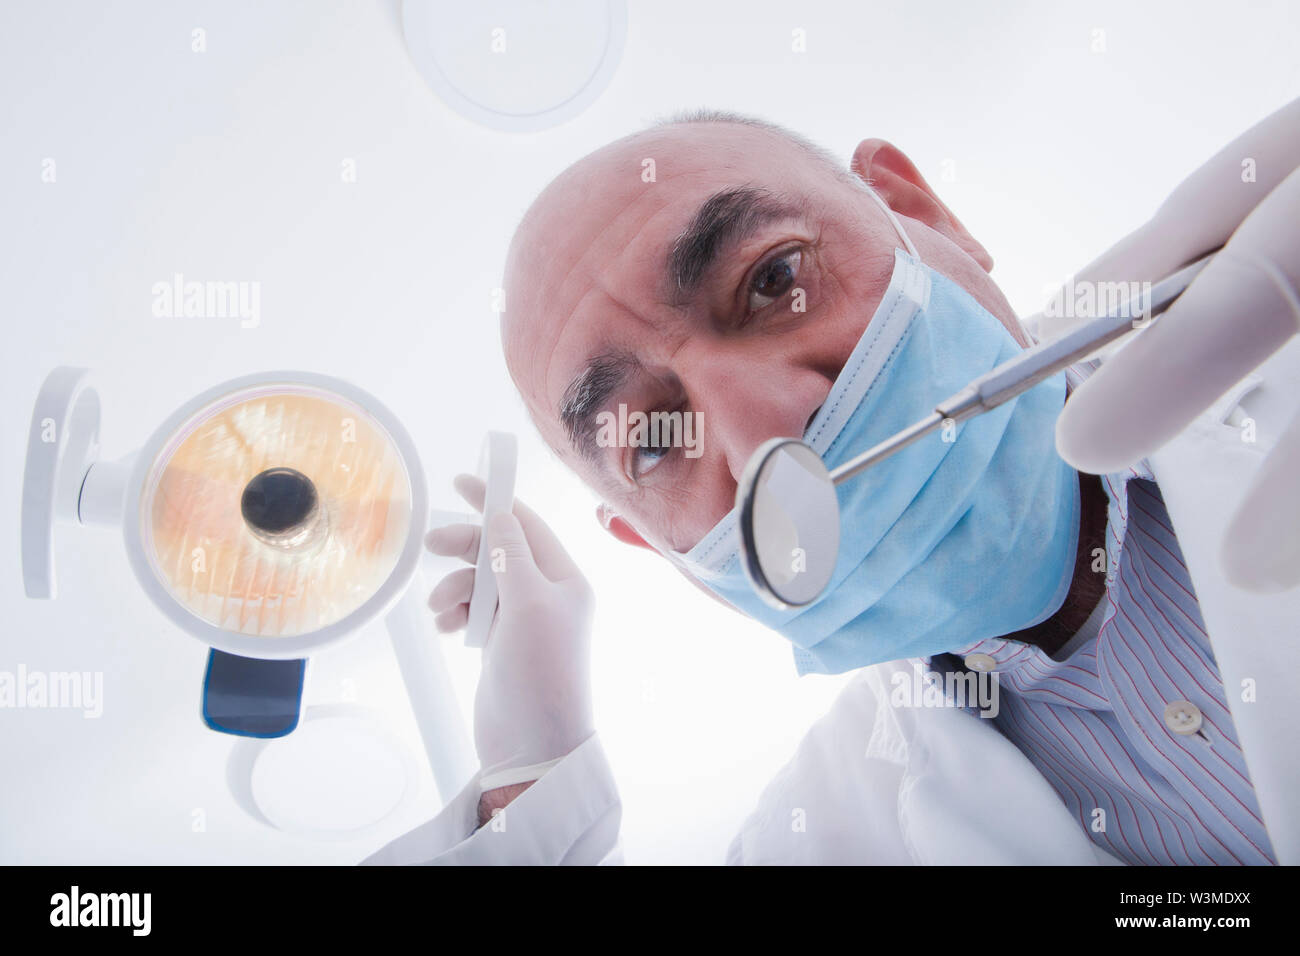 View directly below dentist during examination Stock Photo